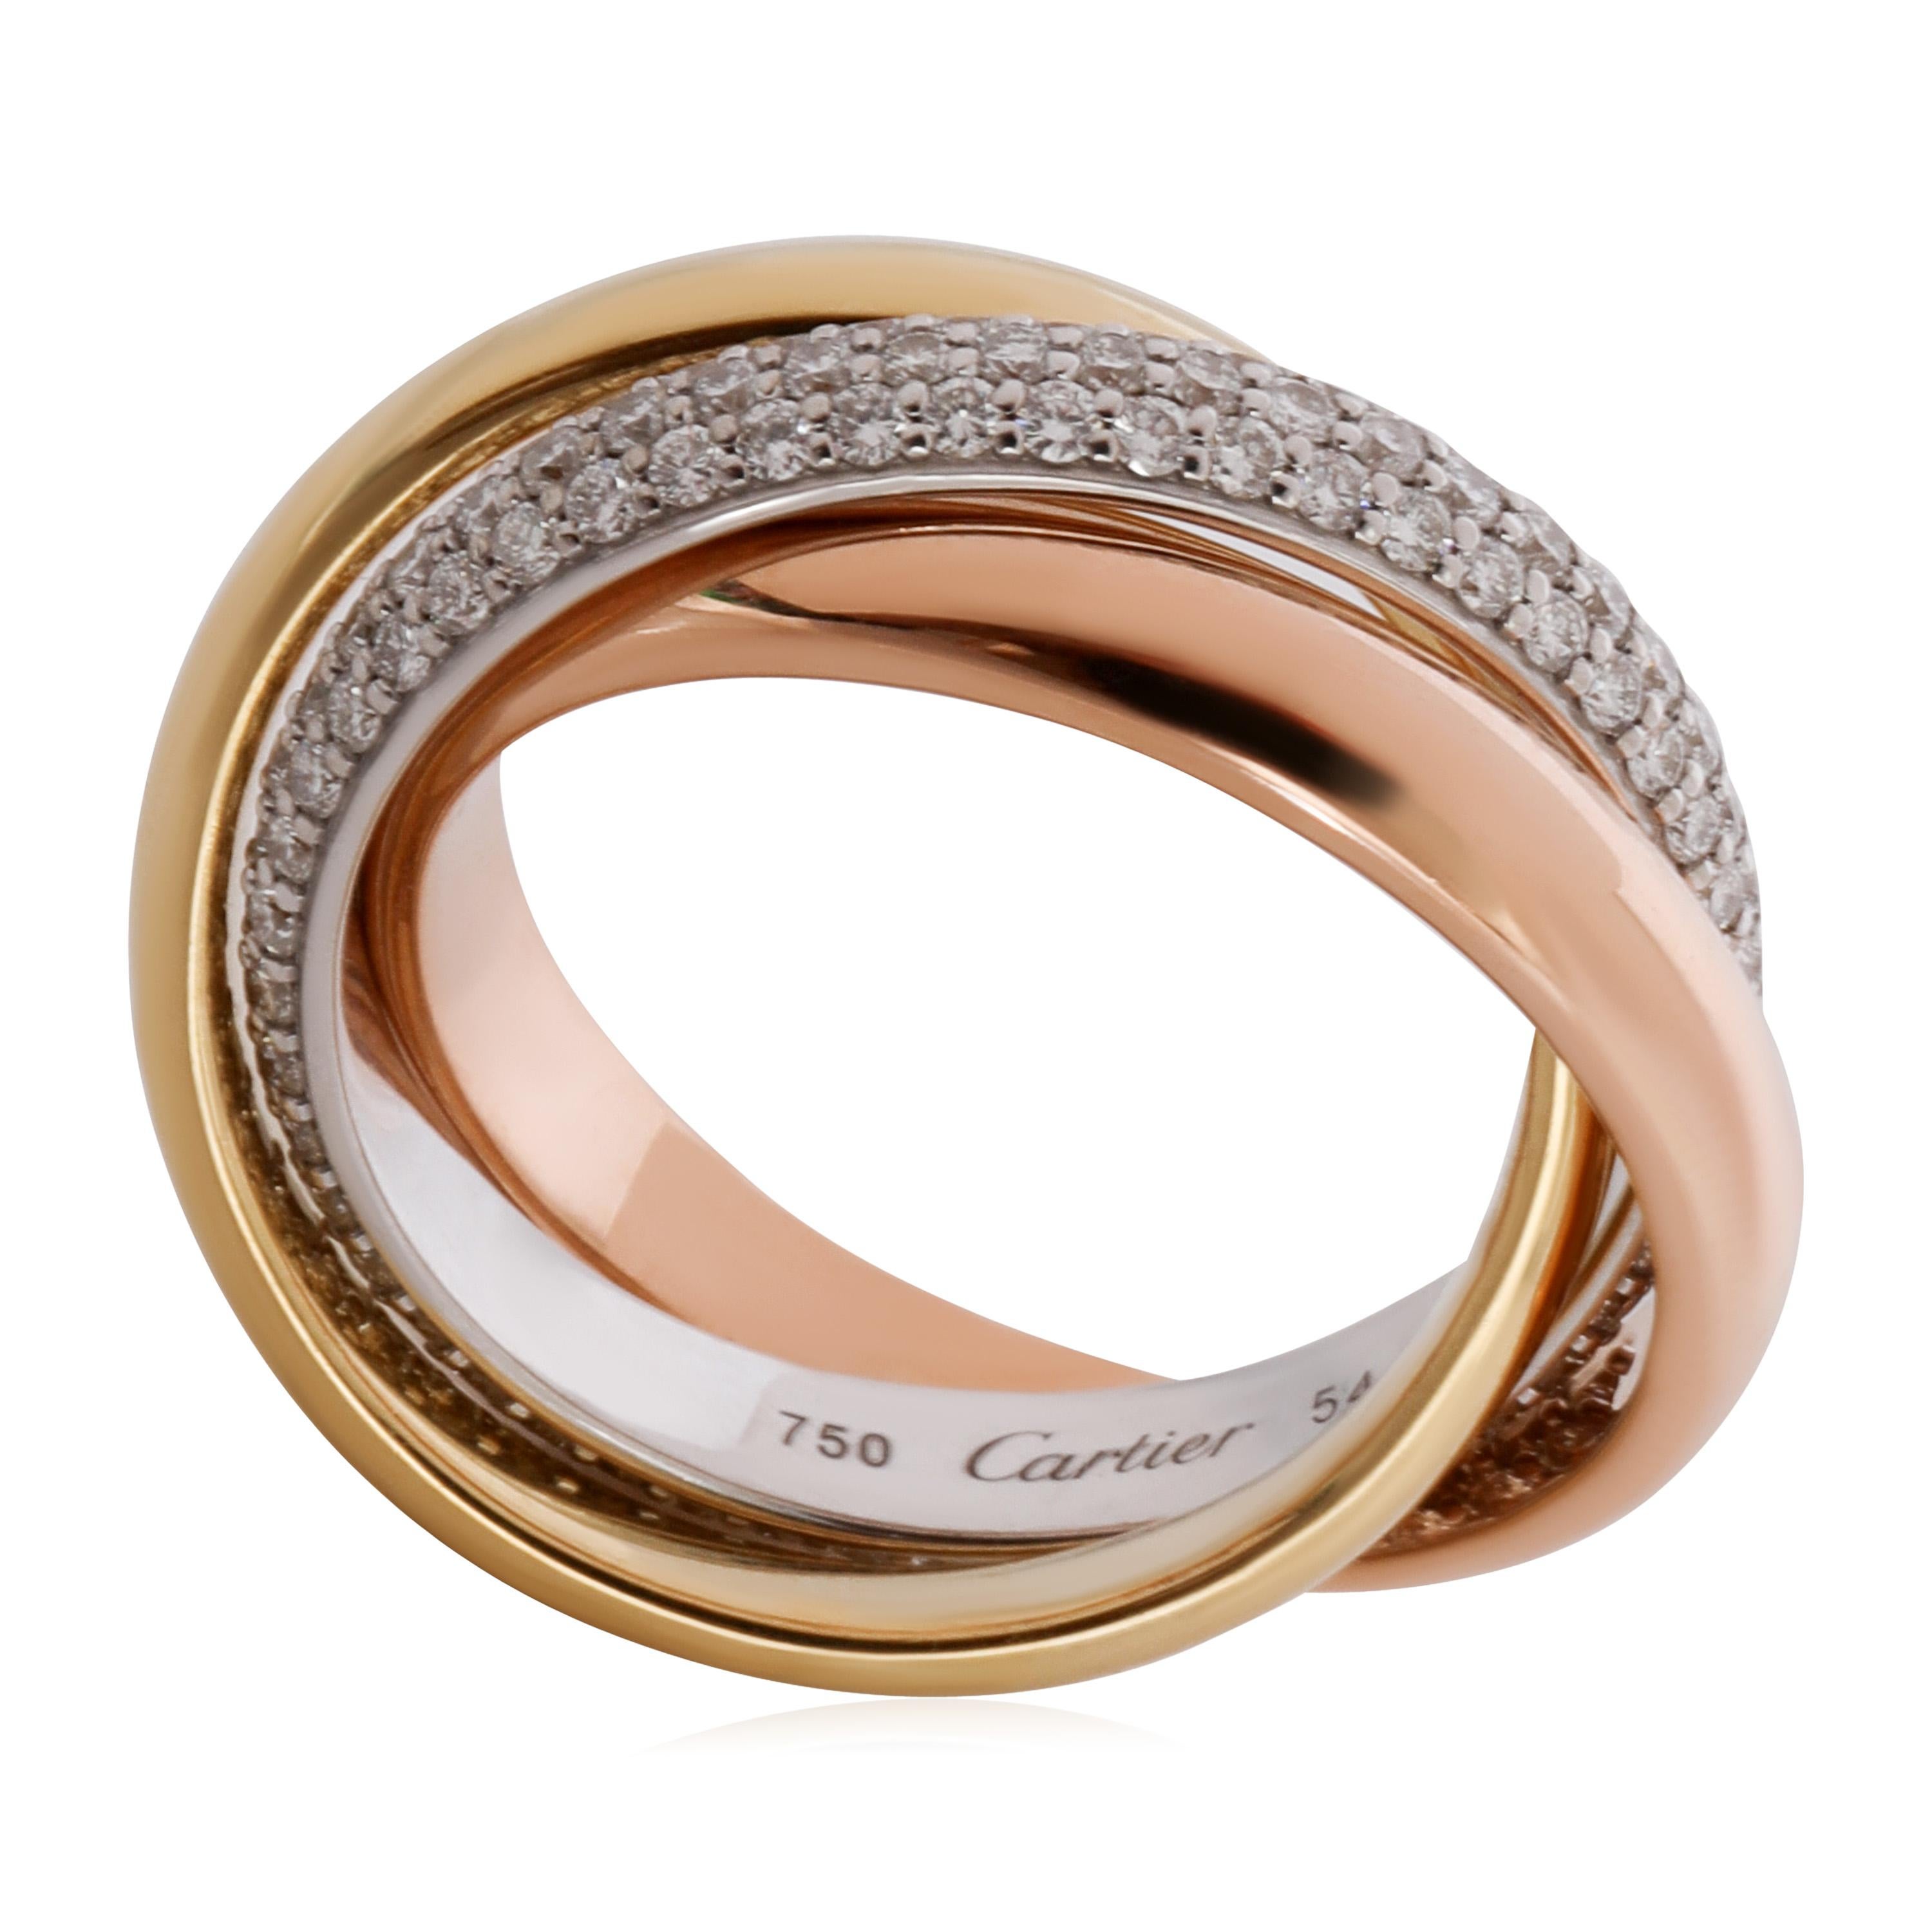 Cartier Trinity Diamond Ring in 18K 3 Tone Gold 0.99 CTW

PRIMARY DETAILS
SKU: 124374
Listing Title: Cartier Trinity Diamond Ring in 18K 3 Tone Gold 0.99 CTW
Condition Description: Retails for 13,100 USD. In excellent condition and recently